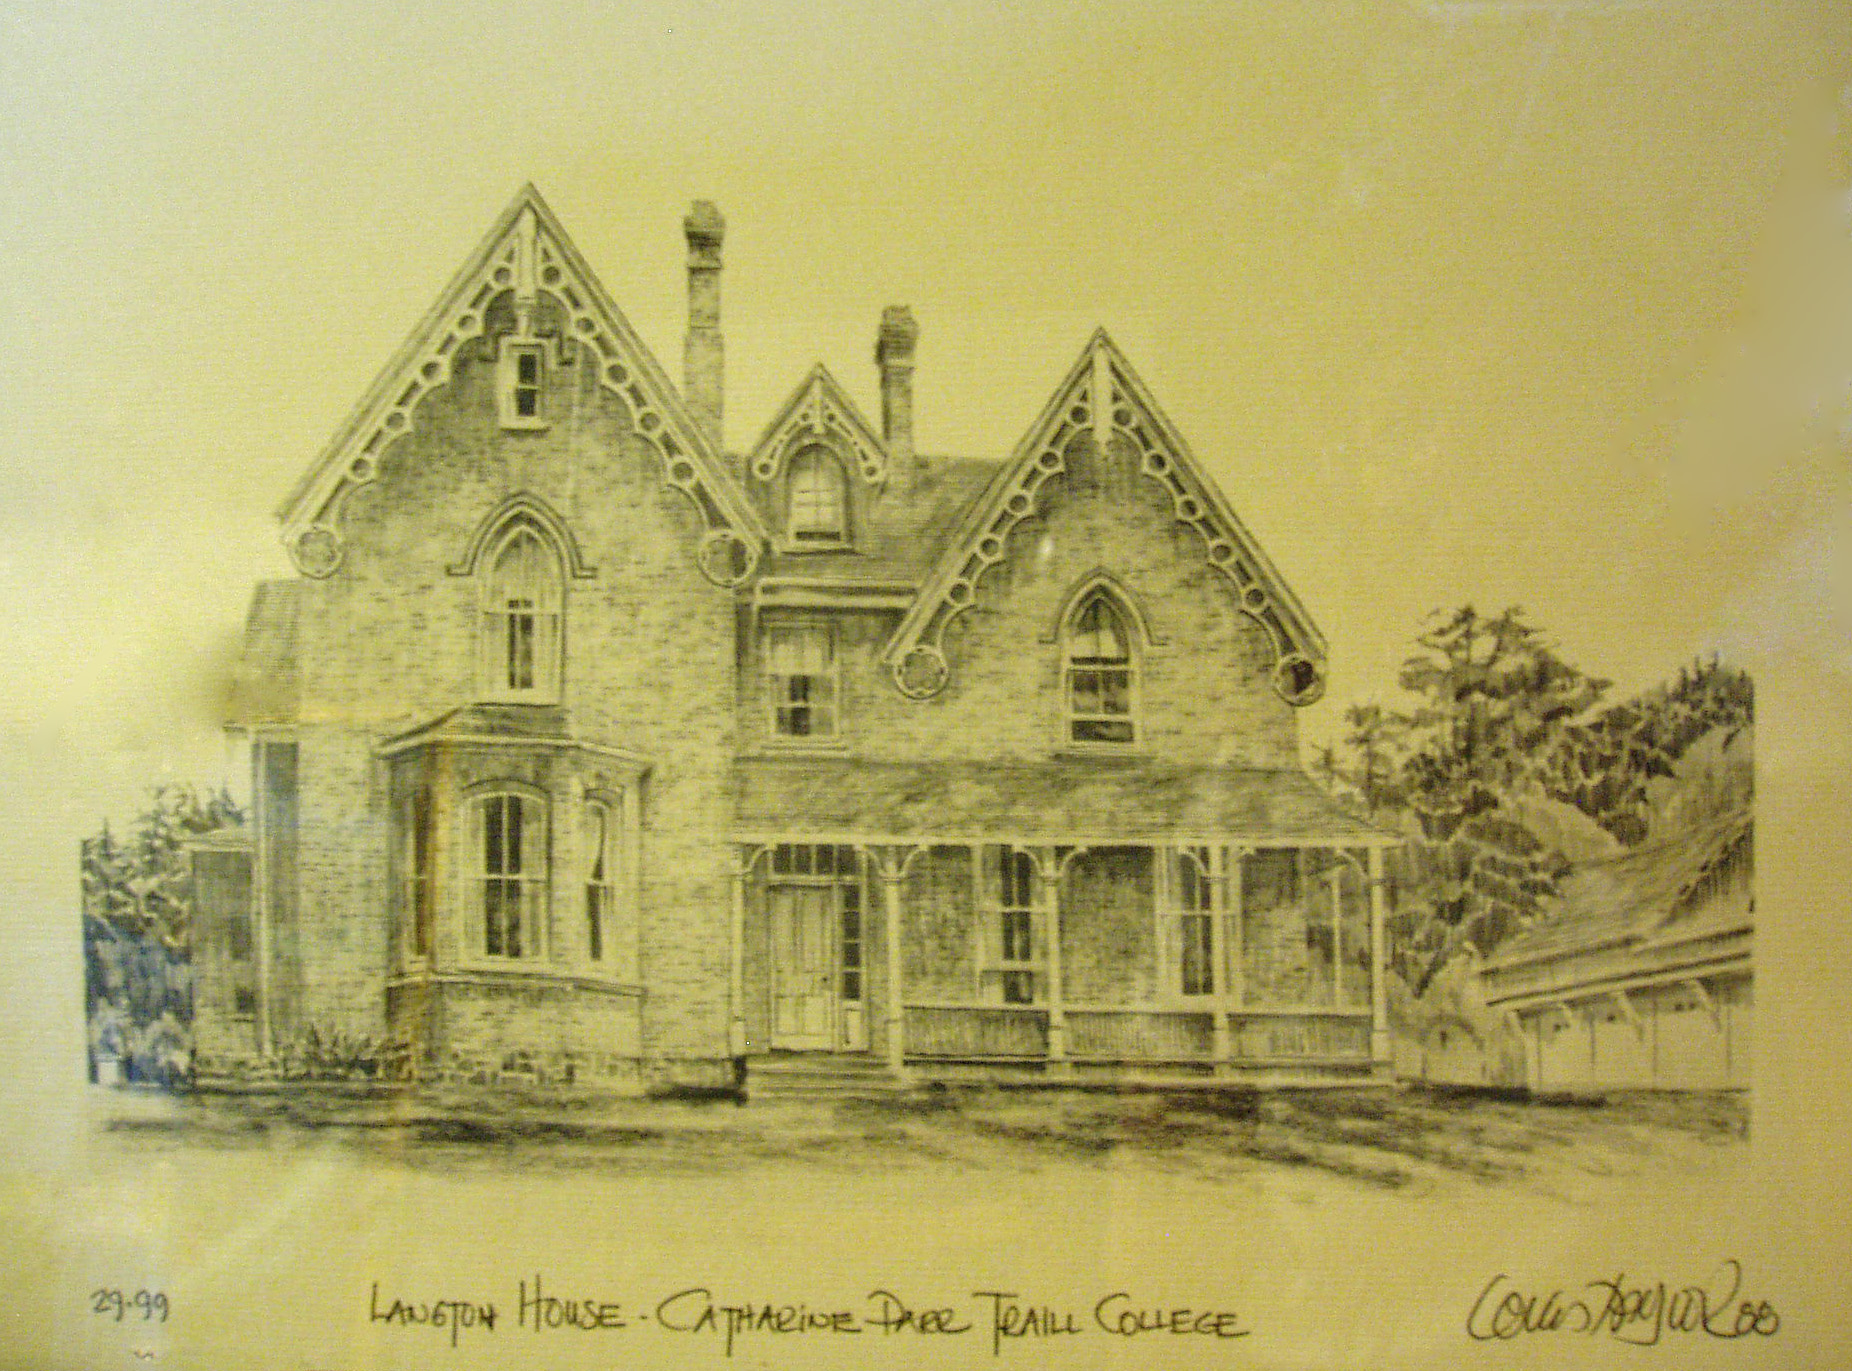 Historic artist's sketch of the front elevation of Dumble-Langton House, showing multiple gable roofs, a front porch, and decorative elements in the Gothic Revival style.